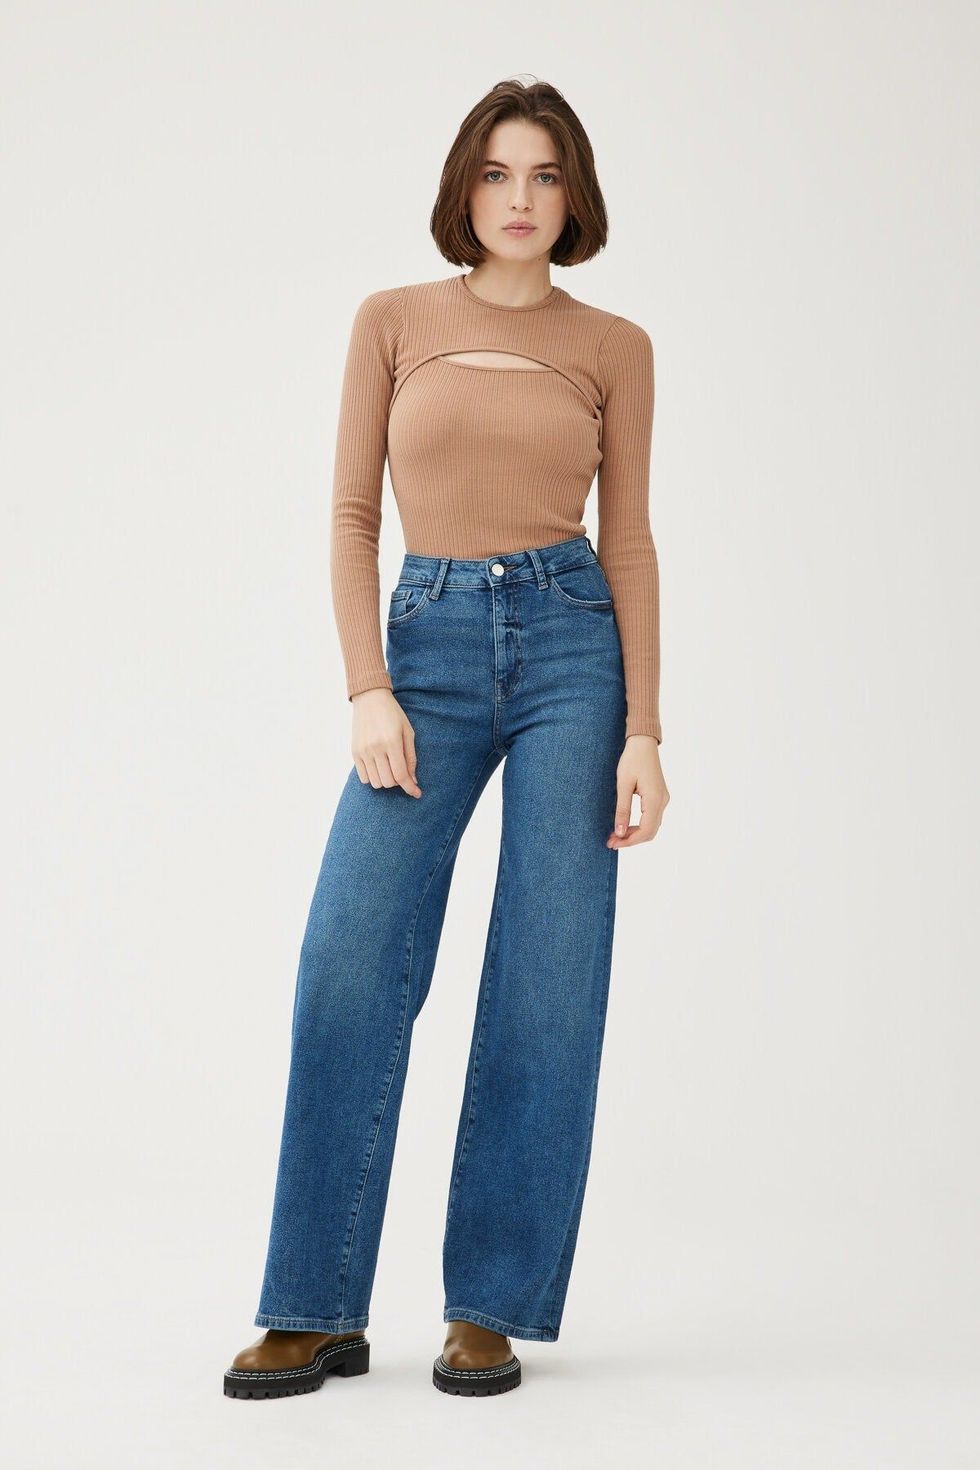 Zara ZW the sailor cropped flare jeans size 2 NWT in 2023